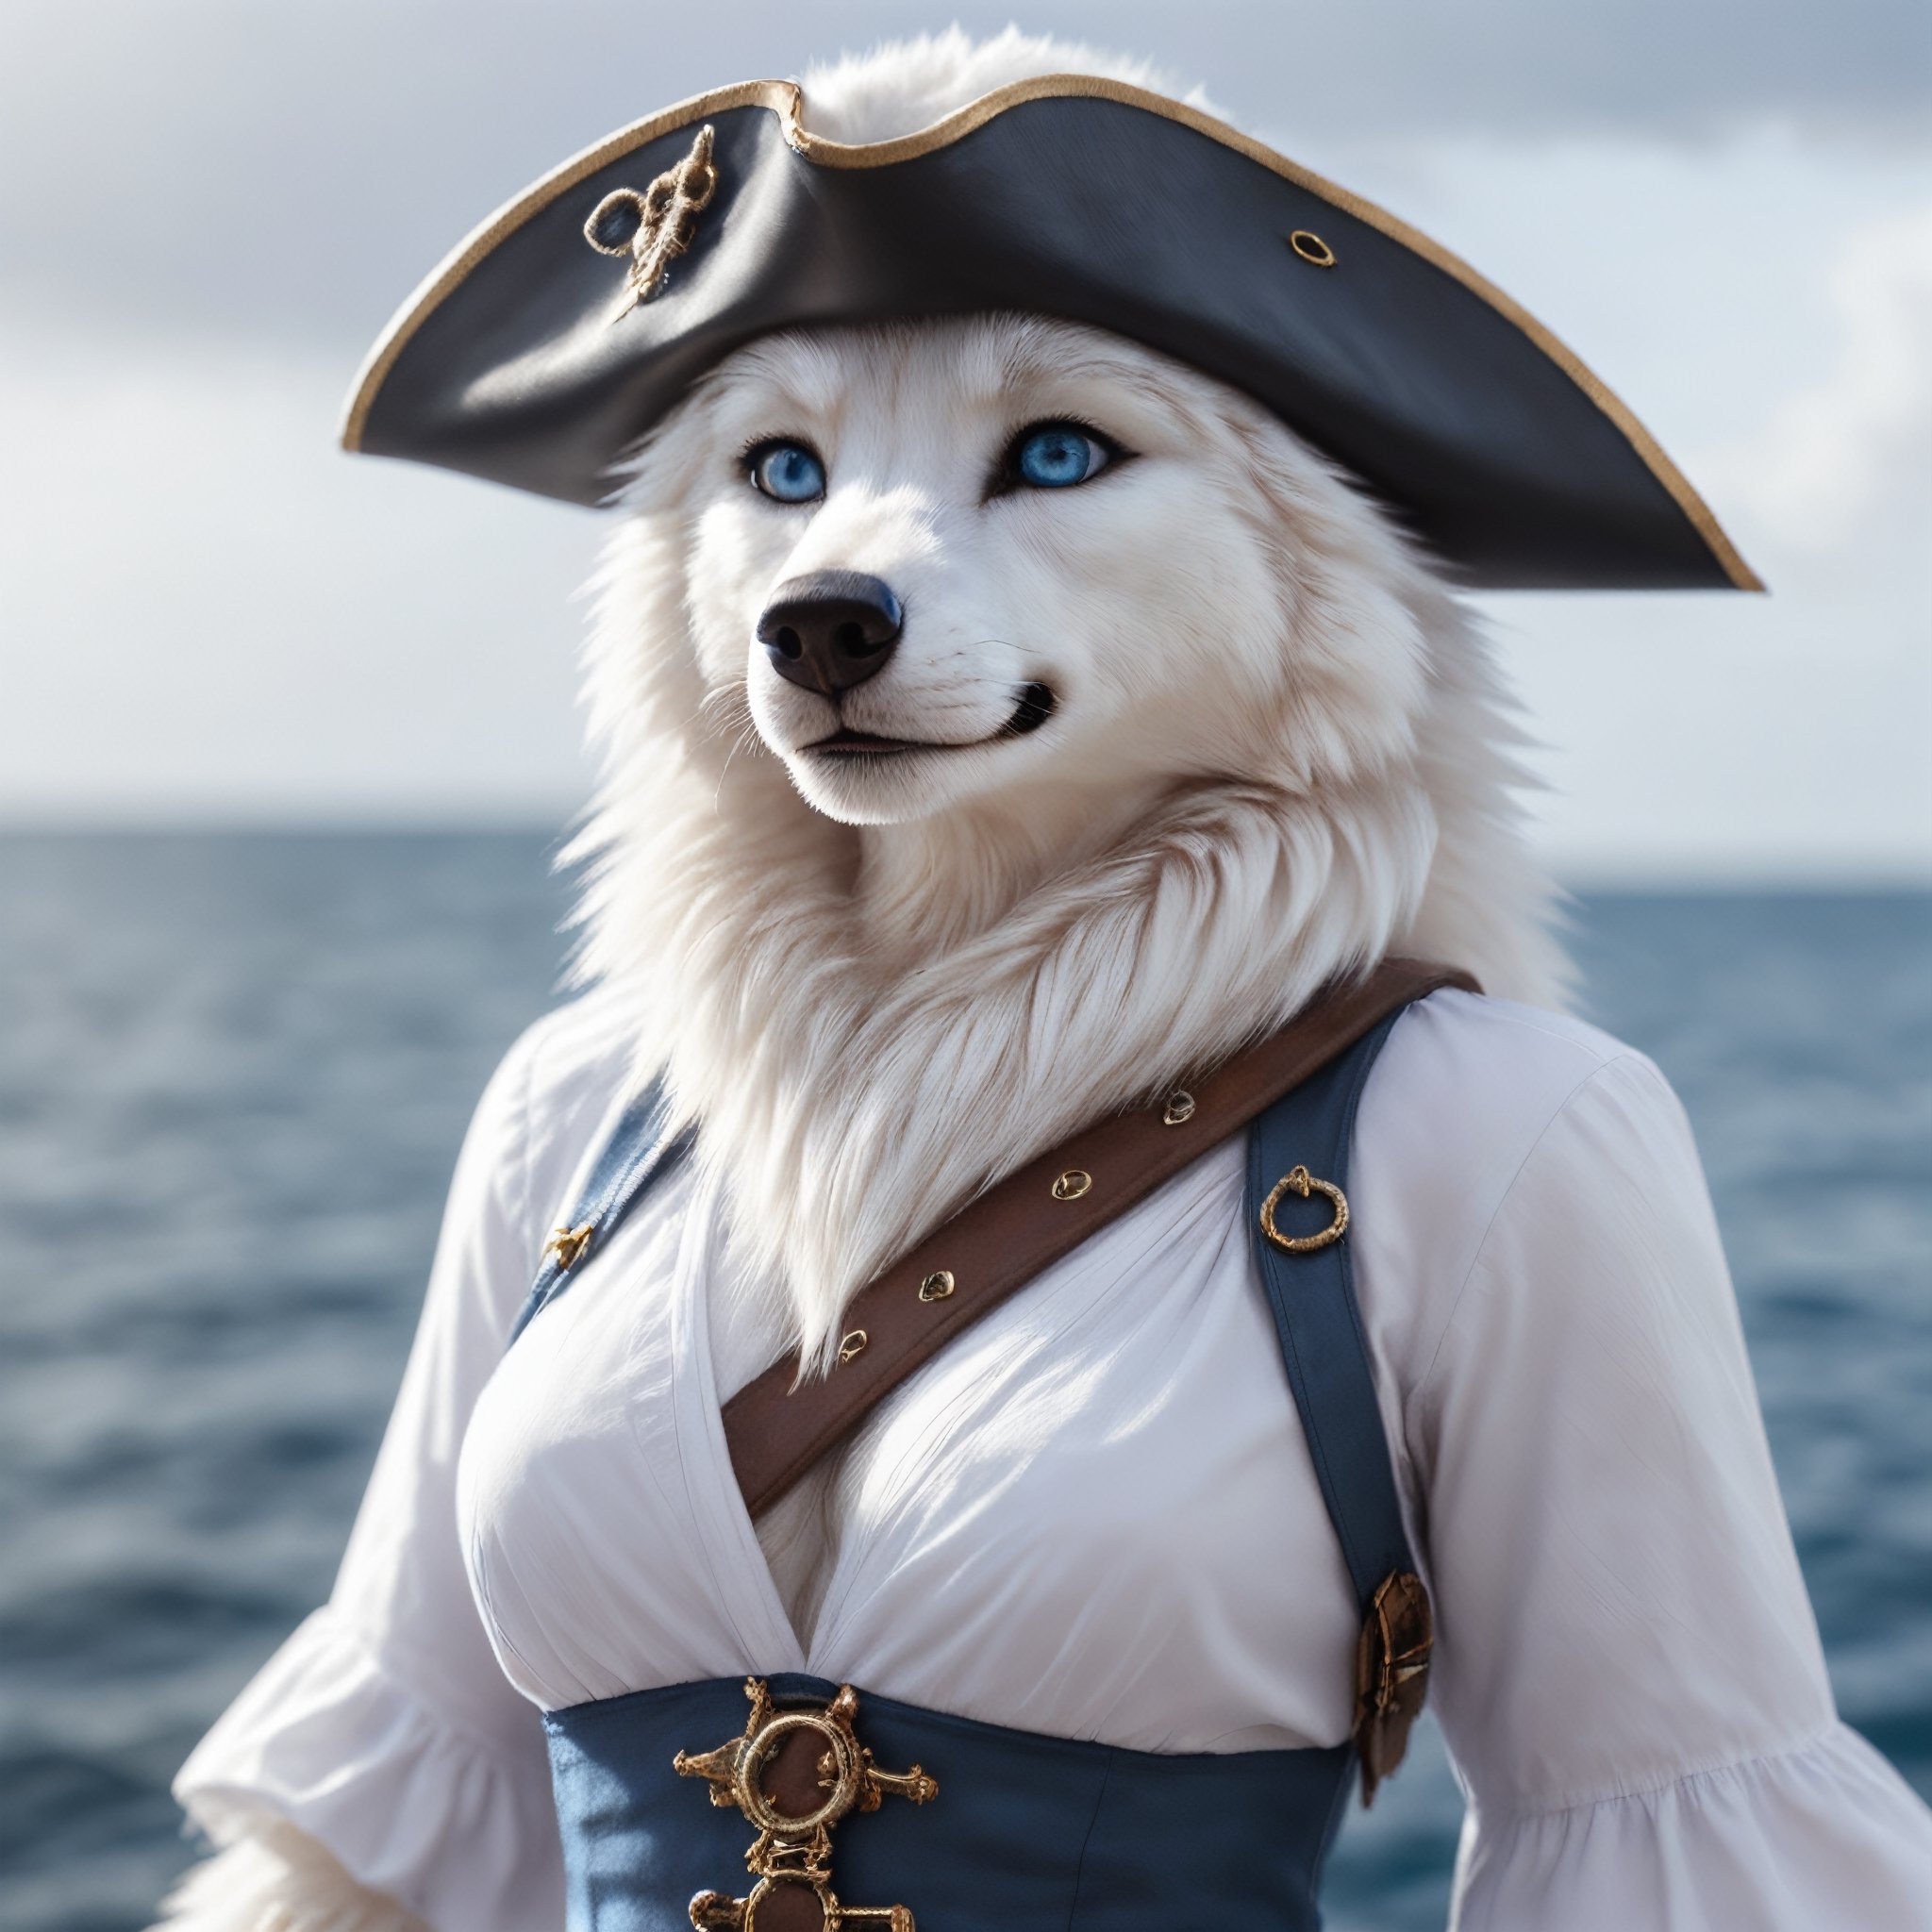 photo face closeup of WhiteWolf  female pirate outfit, epic stormy sea